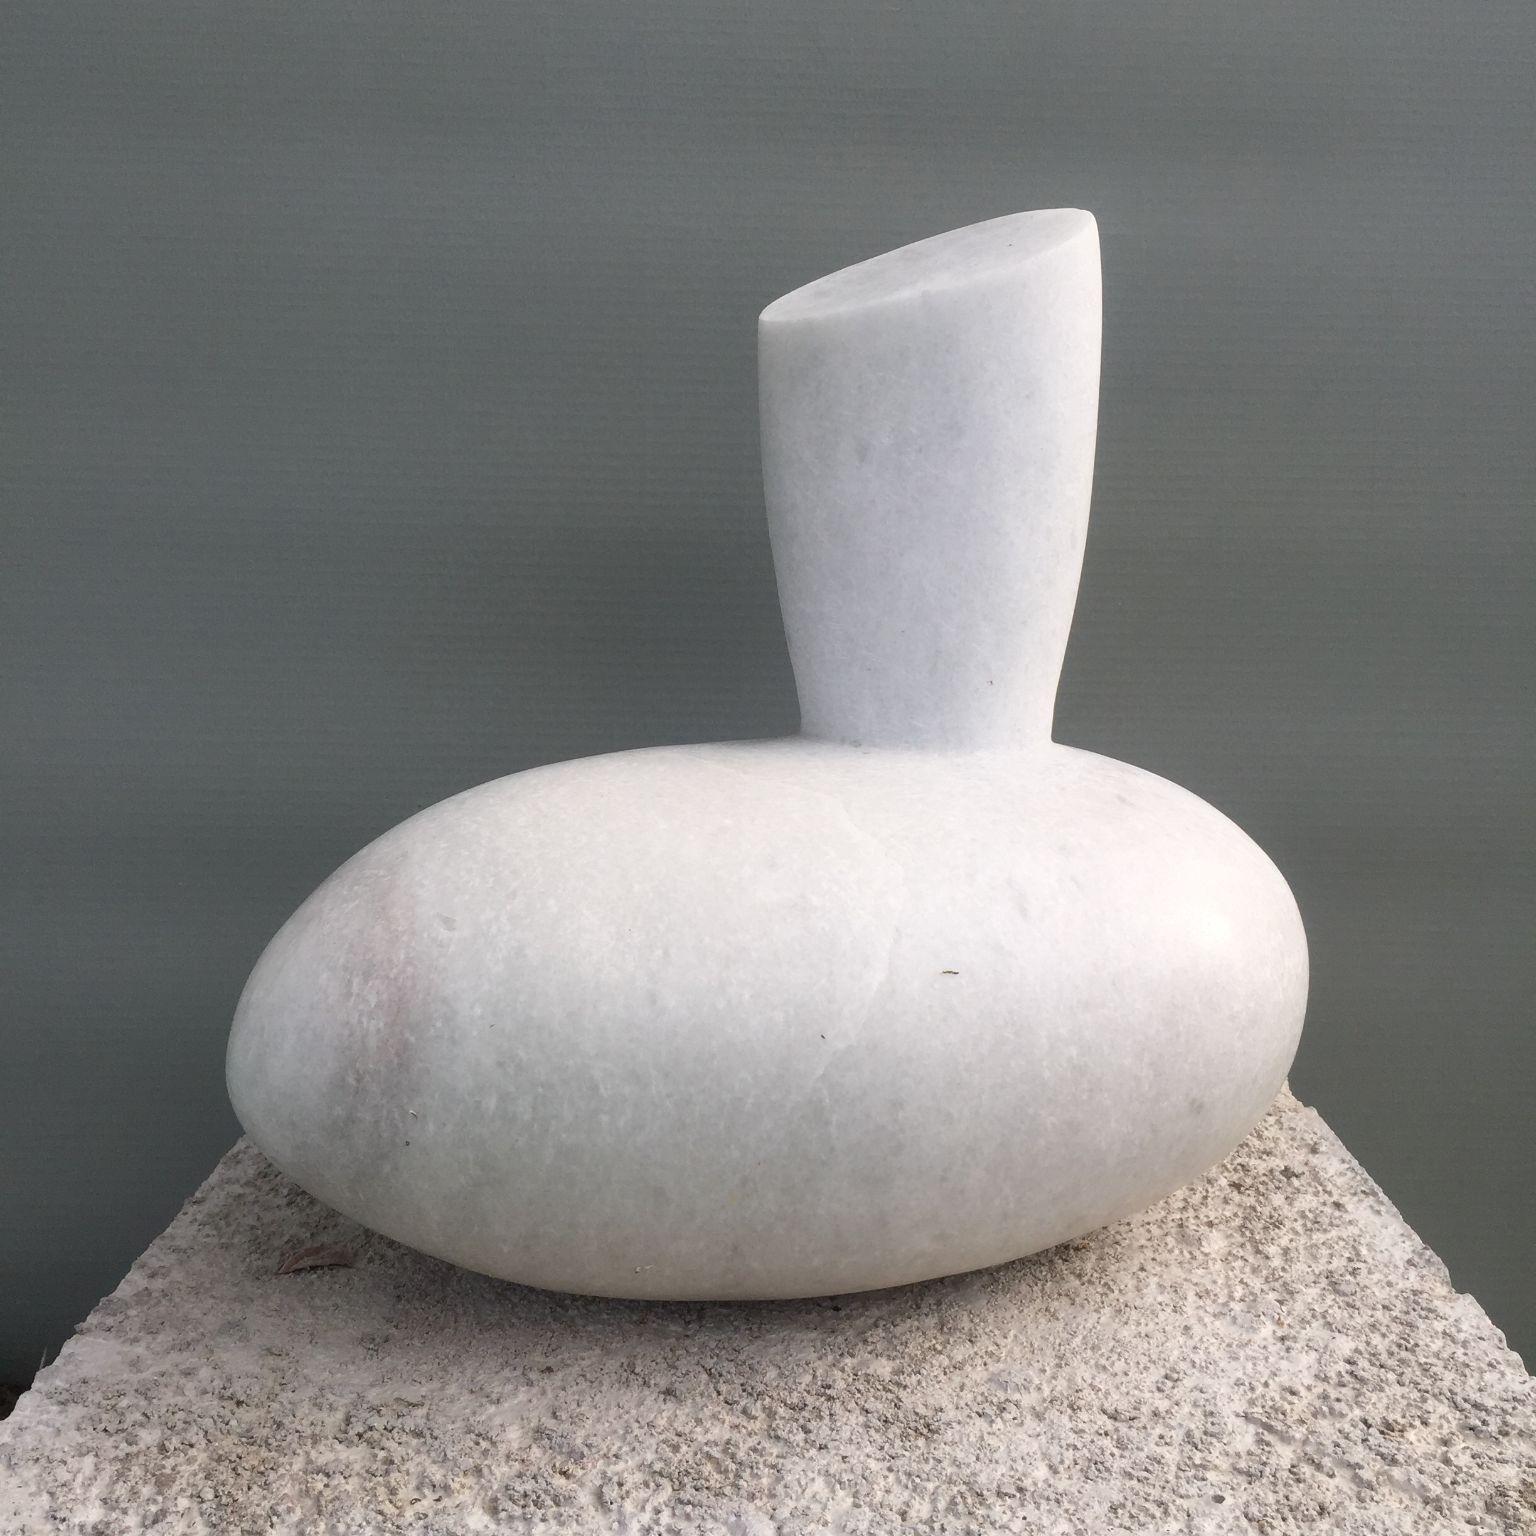 Hand carved marble sculpture by Tom Von Kaenel
Dimensions: D30 x W40 x H39 cm
Materials: Marble

Tom von Kaenel, sculptor and painter, was born in Switzerland in 1961. Already in his early
childhood he was deeply devoted to art. His desire to